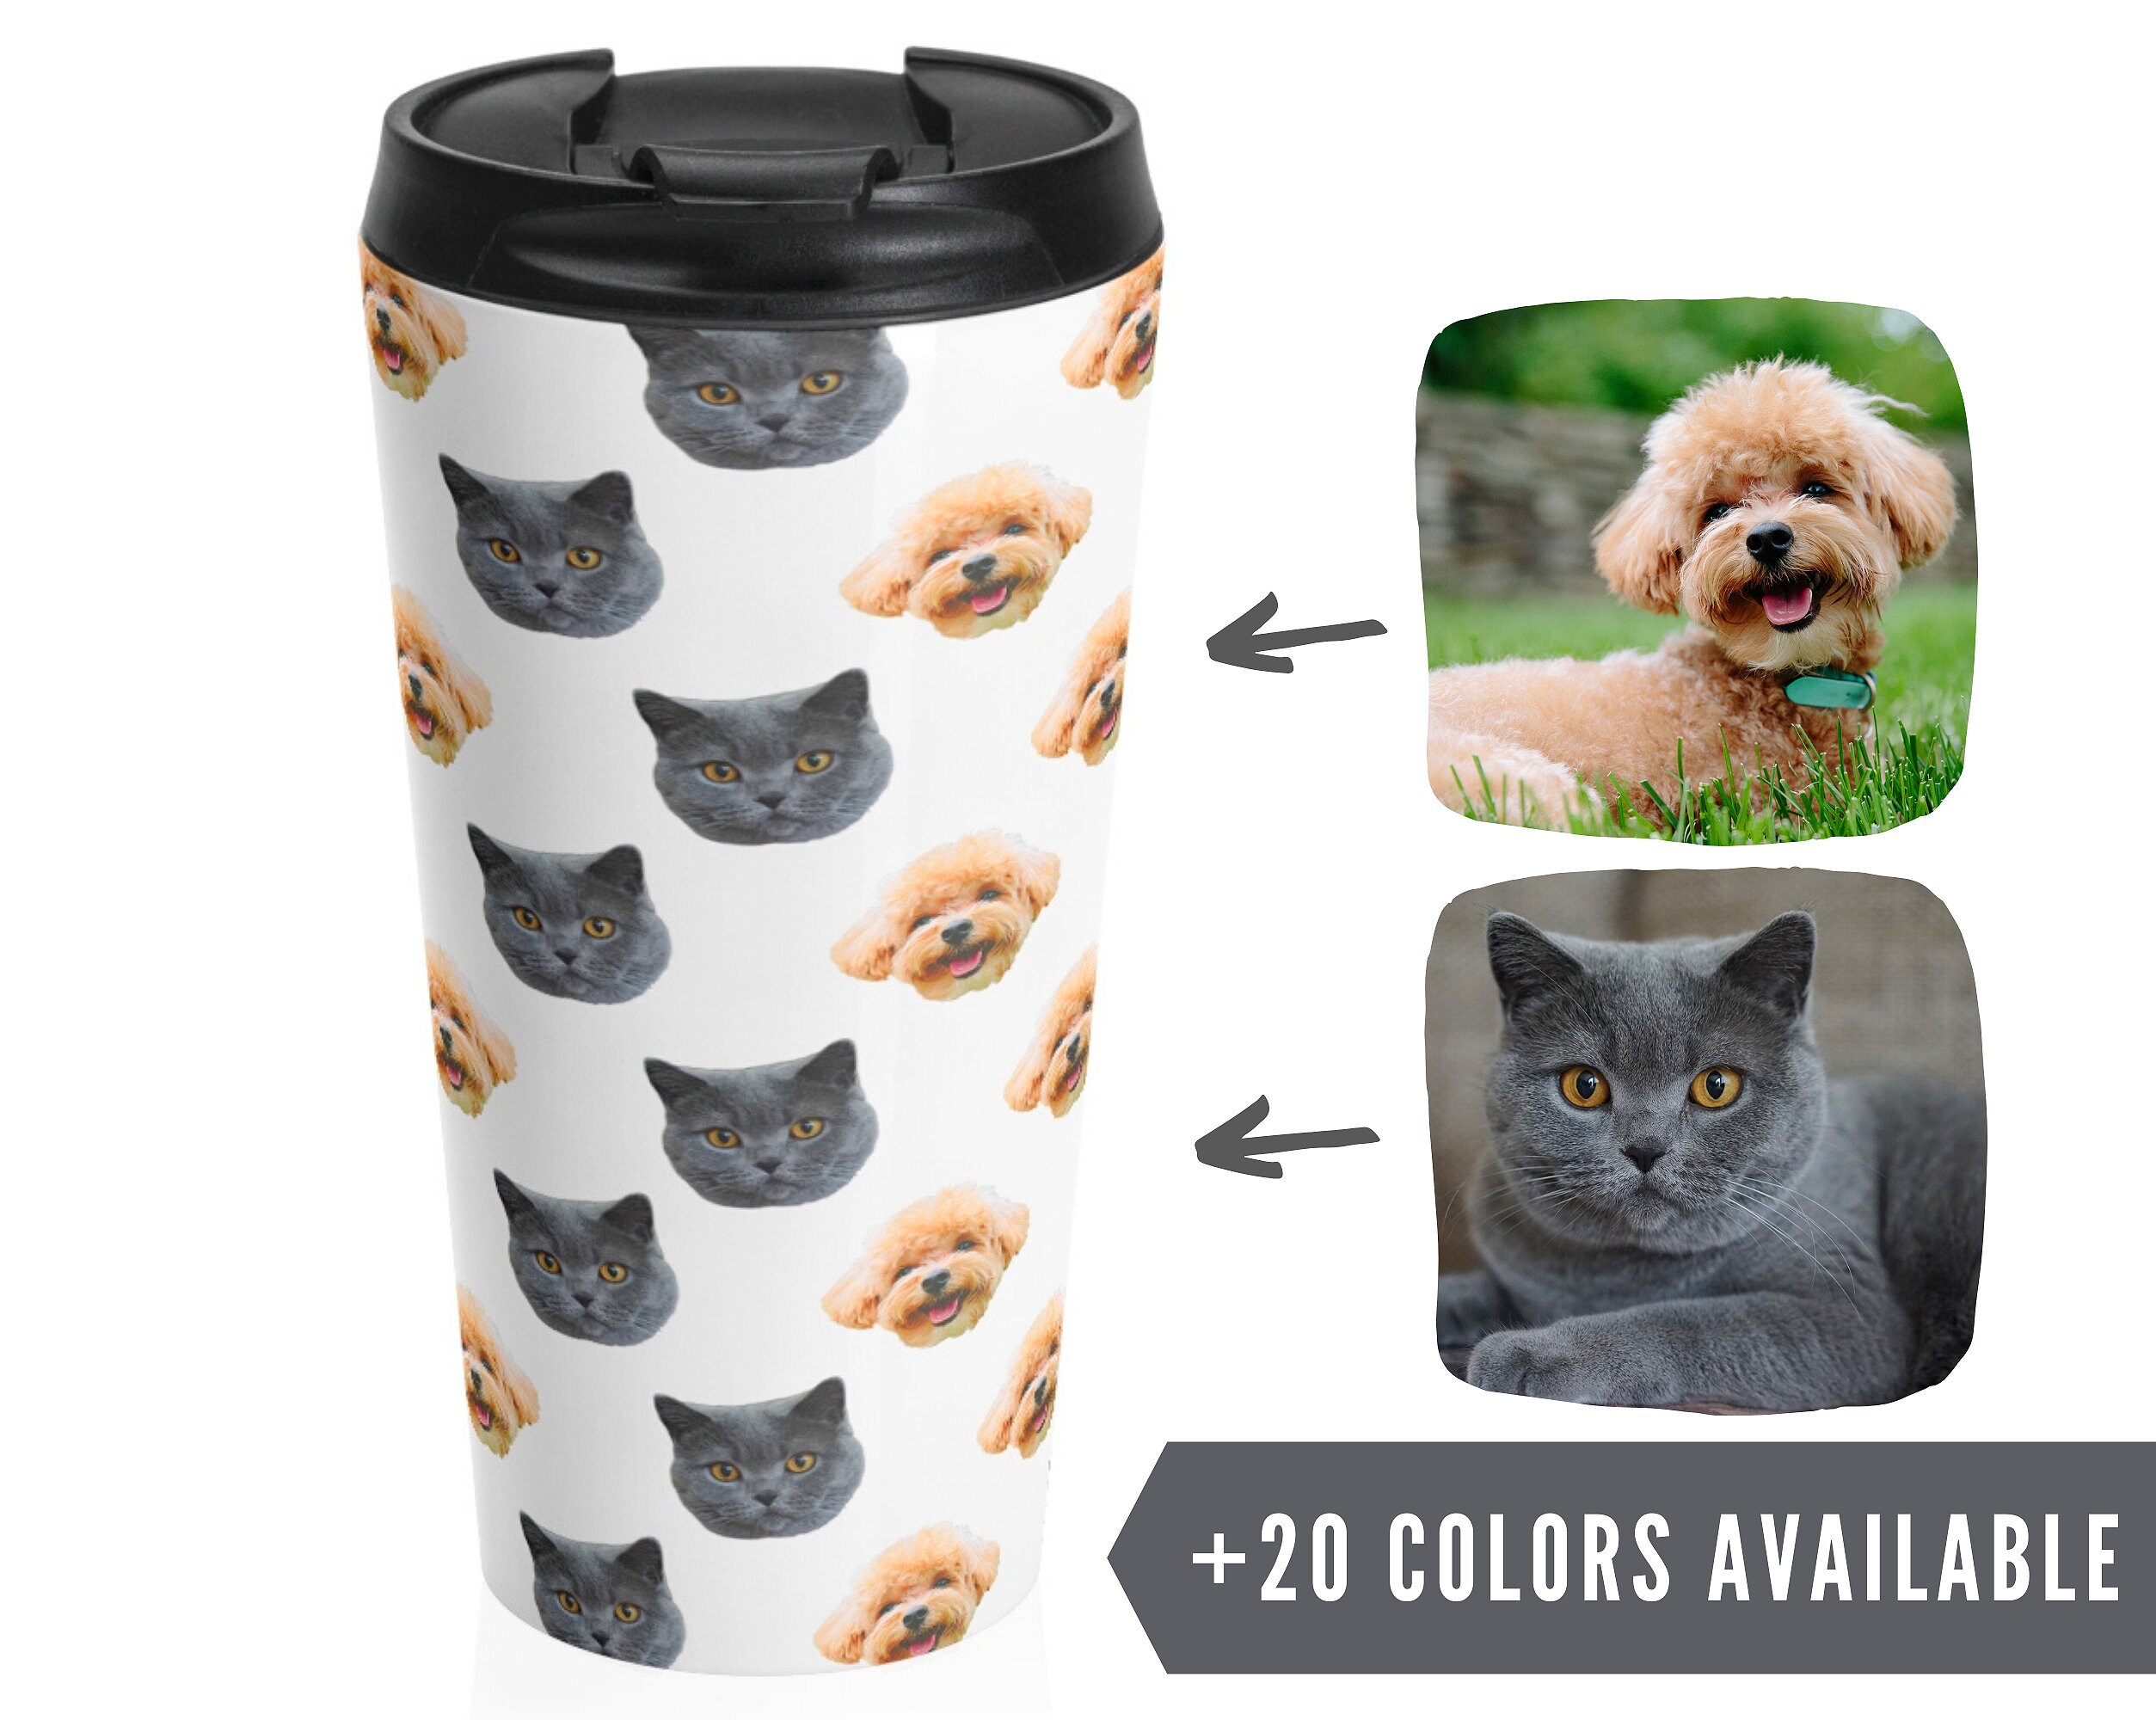 Cats and Beards Travel Mug Insulated Stainless Steel Travel Mug Cat Dad  Travel Tumbler Cat Dad Thermos Funny Cat Pattern Travel Mug 